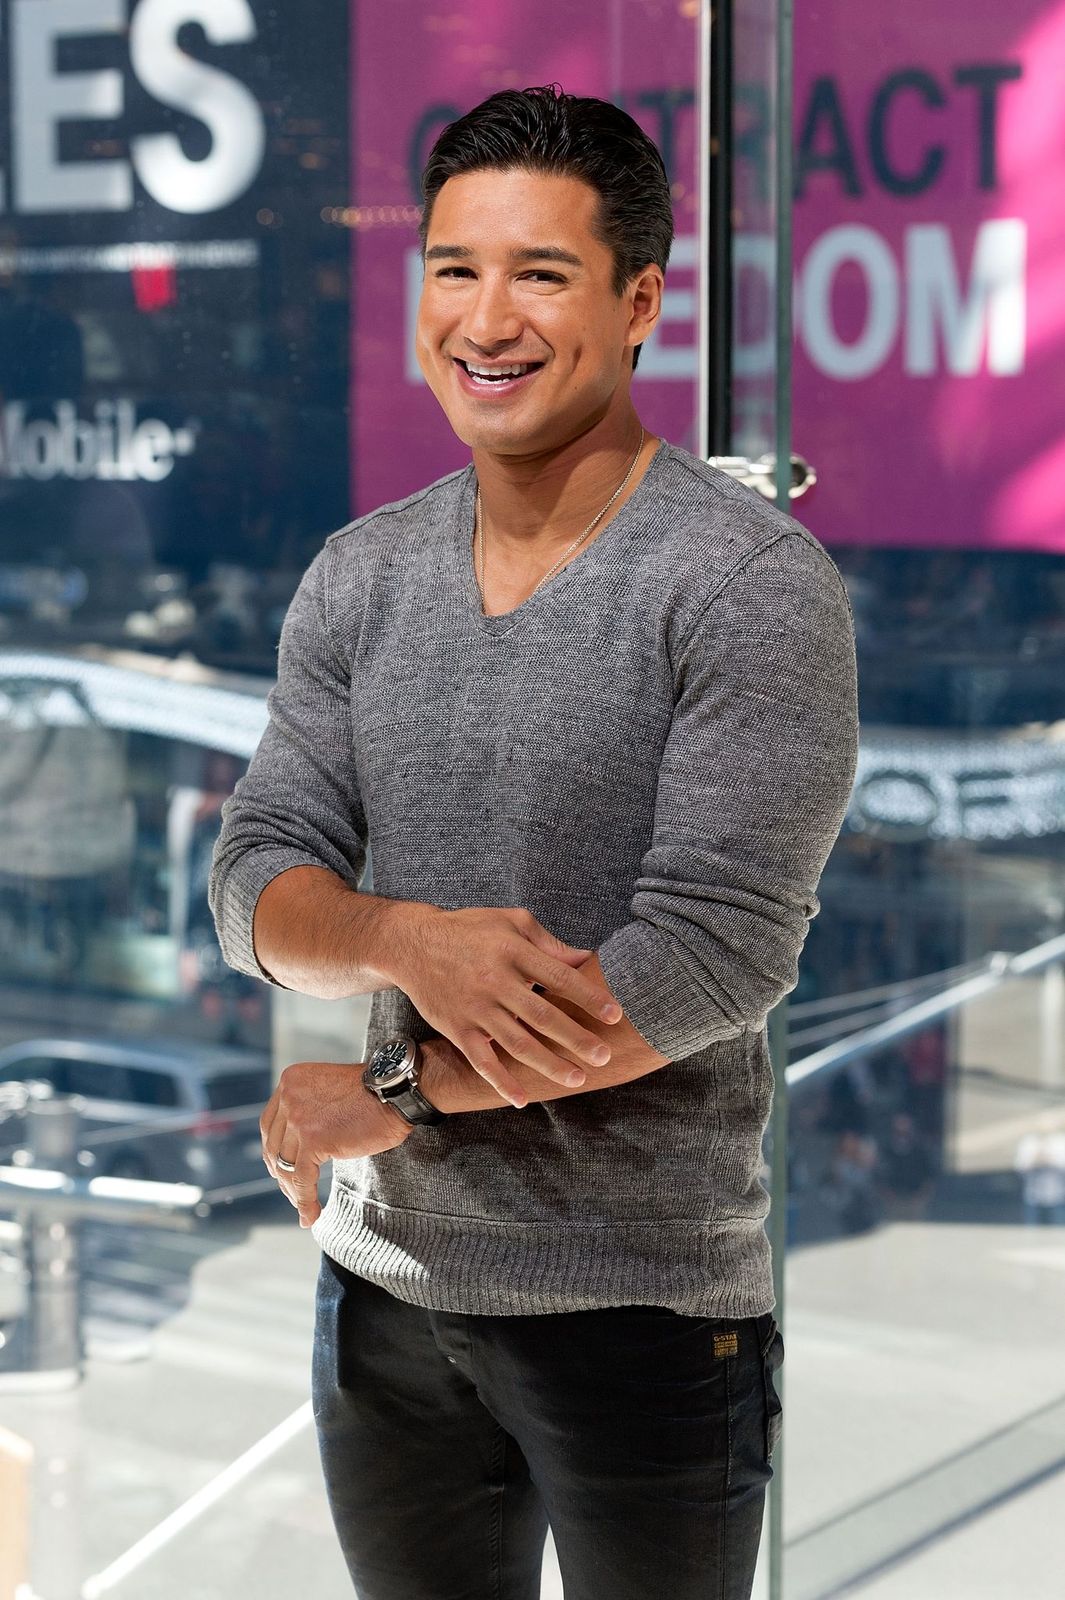 Mario Lopez hosts "Extra" at their New York studios in Times Square on October 6, 2014, in New York City | Photo: D Dipasupil/Getty Images